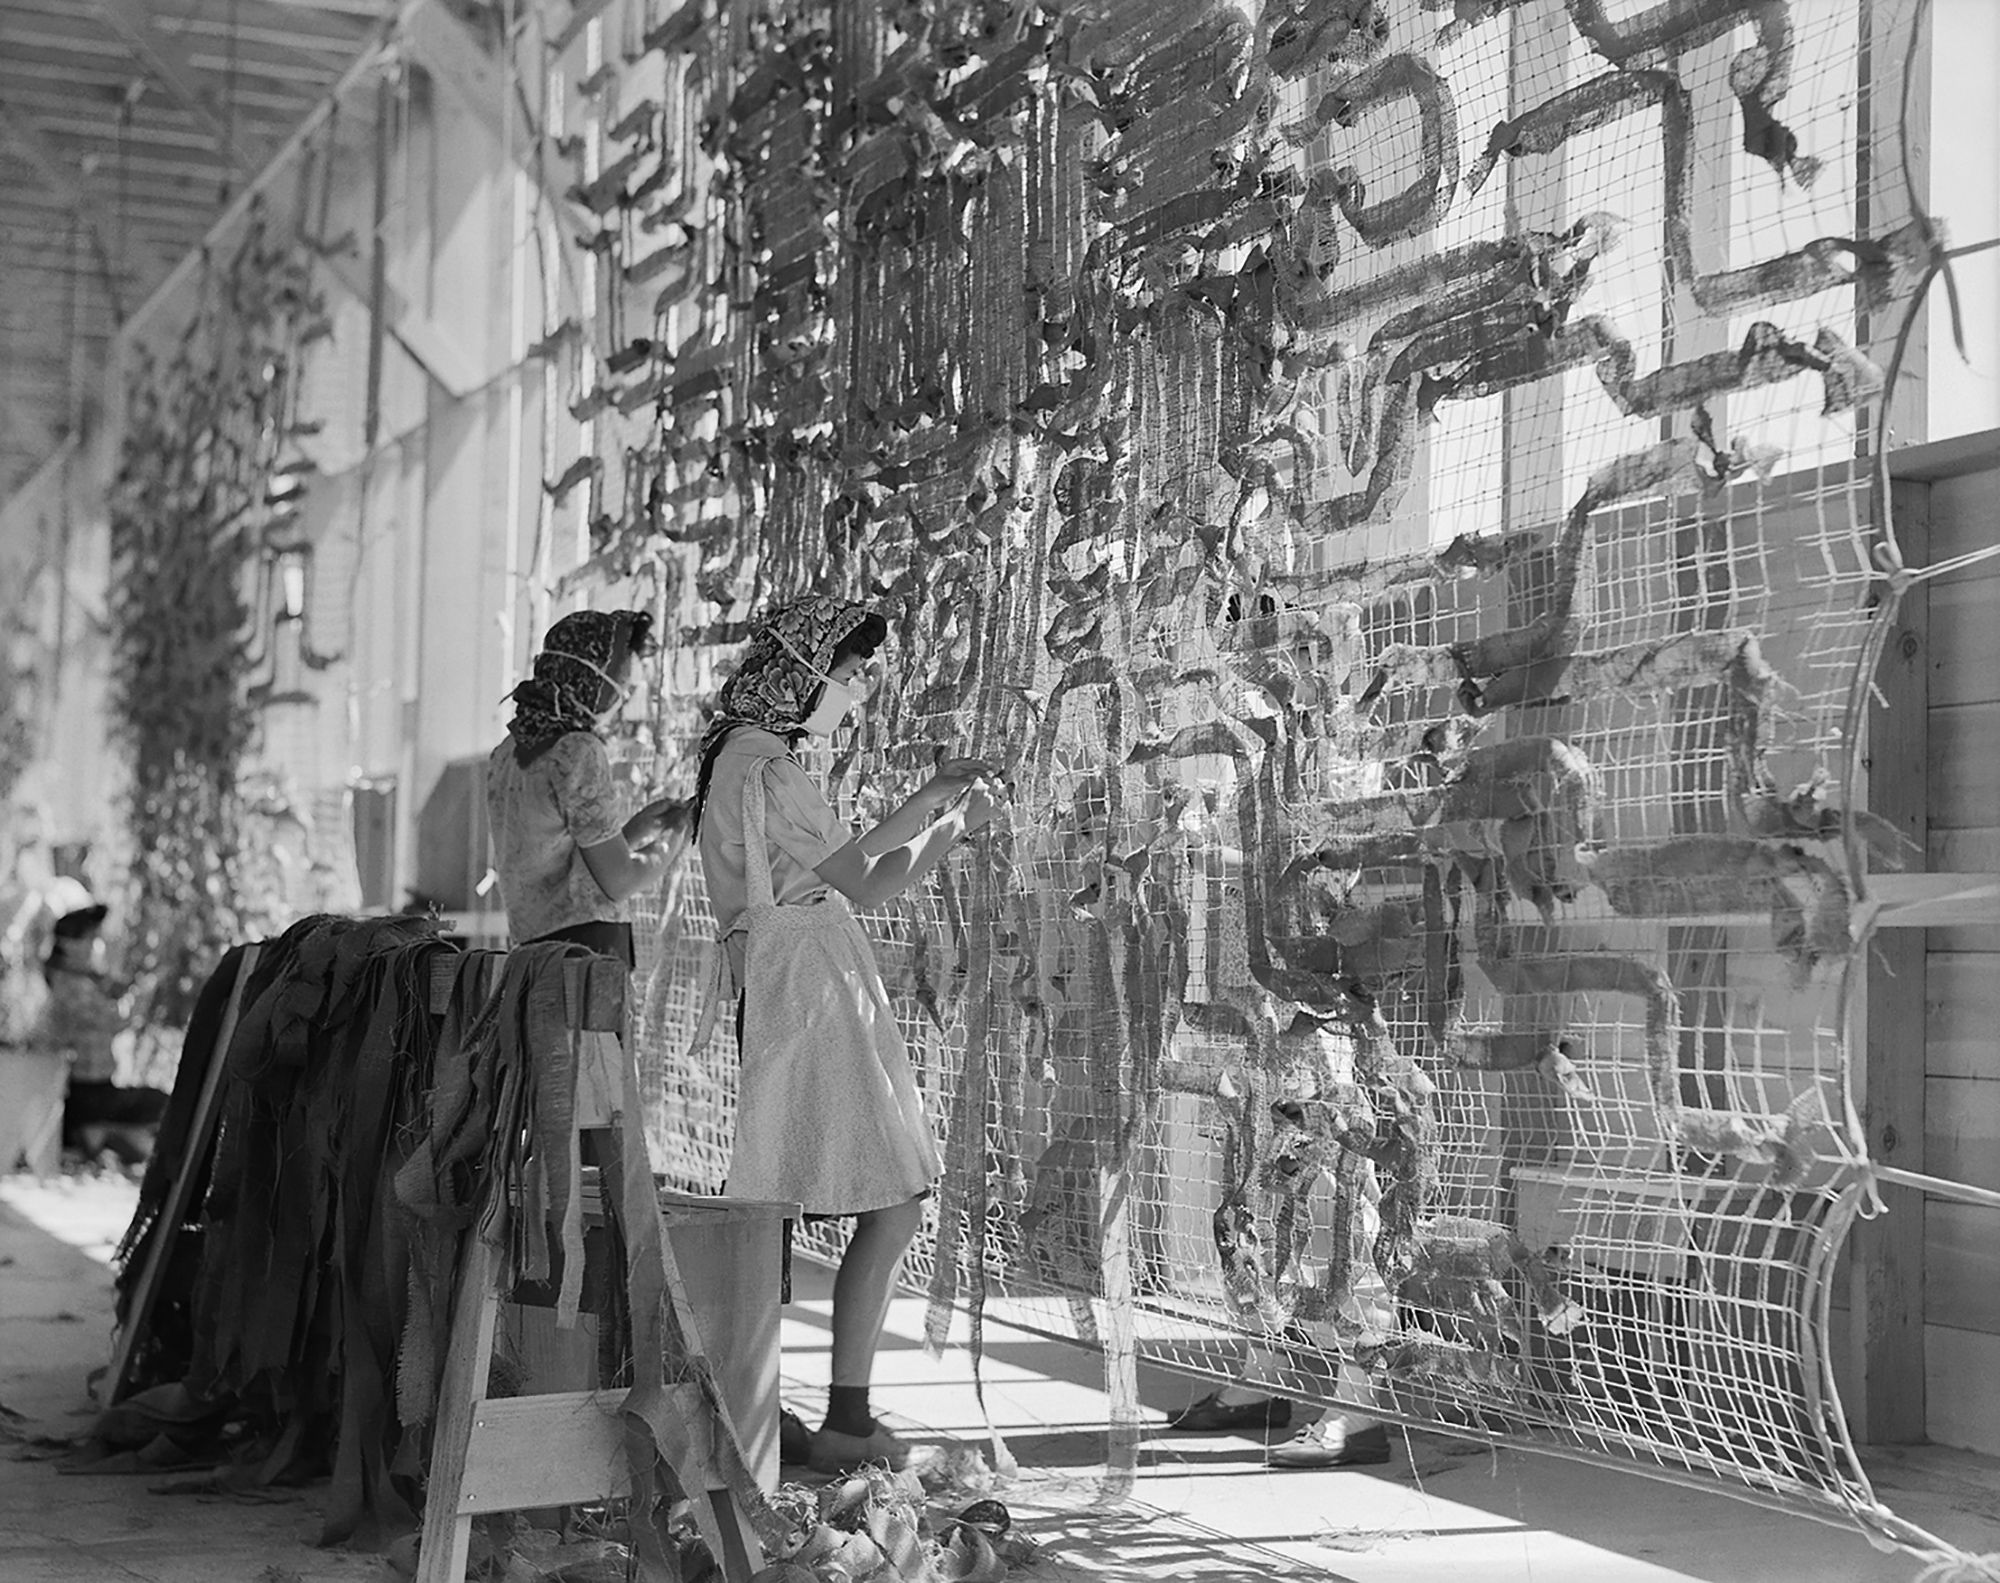 Manzanar Relocation Center, Manzanar, Calif. Making camouflage nets for the War Department. In 1942, Lange was commissioned to photograph the U.S. Government's imprisonment of Japanese Americans. Her negatives were impounded by the Army; she did not see them until 1964. (Dorothea Lange—National Archives/courtesy of MACK)